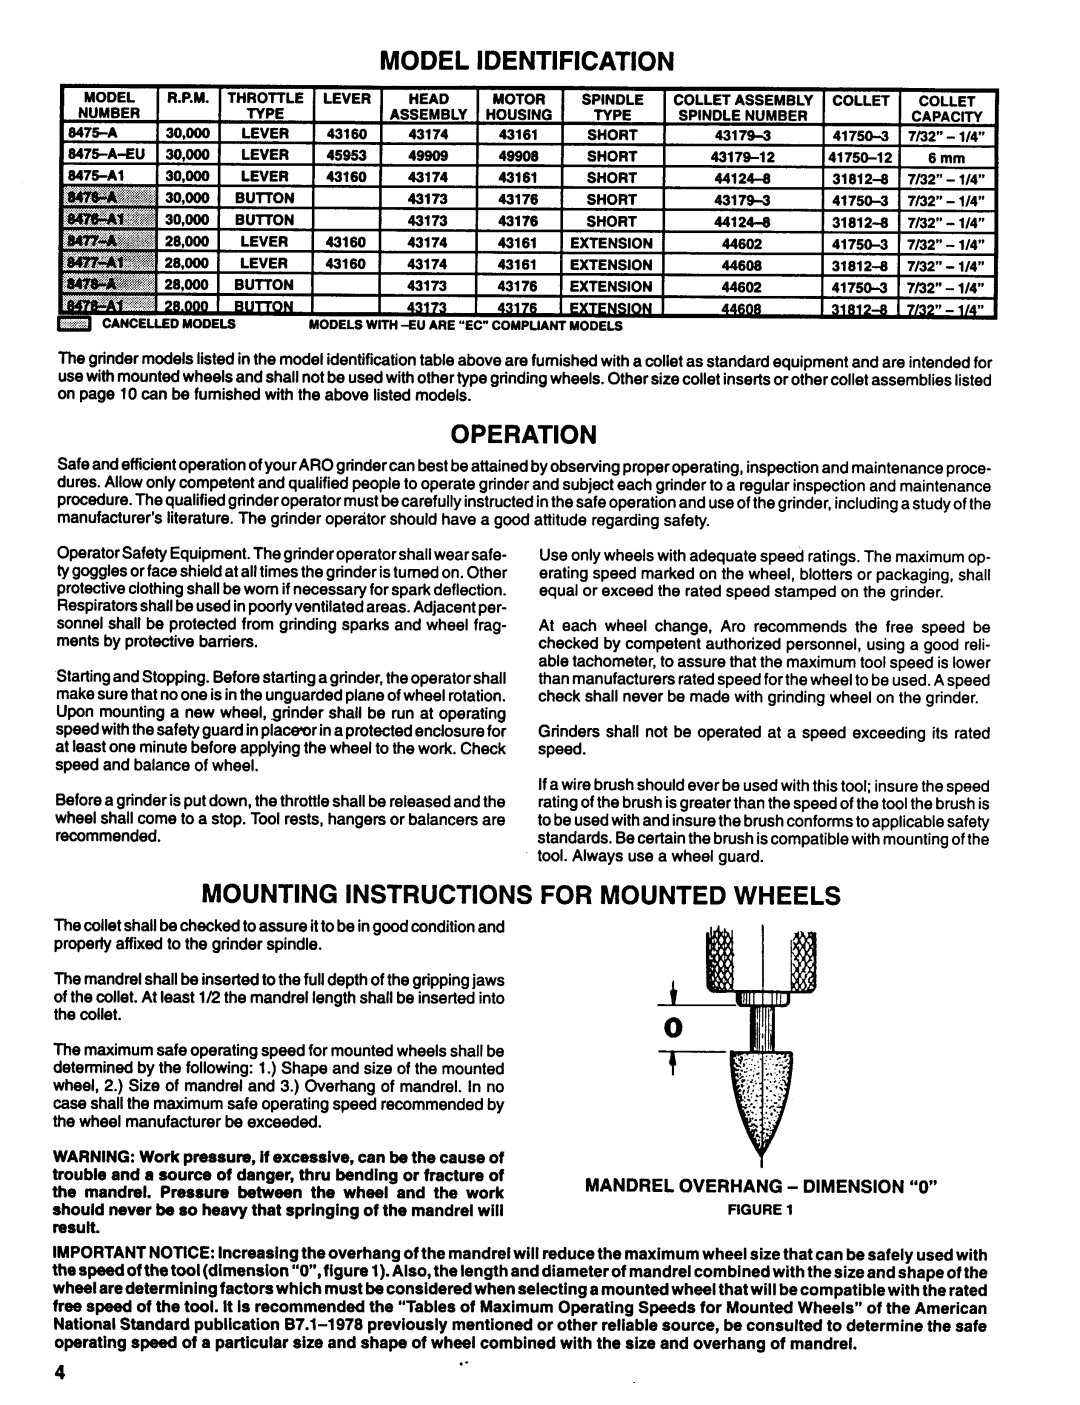 Ingersoll-Rand 8475-A1, 8478-A1, 8475-A-( ) manual Model Identification, Operation, Mounting Instructions For Mounted Wheels 